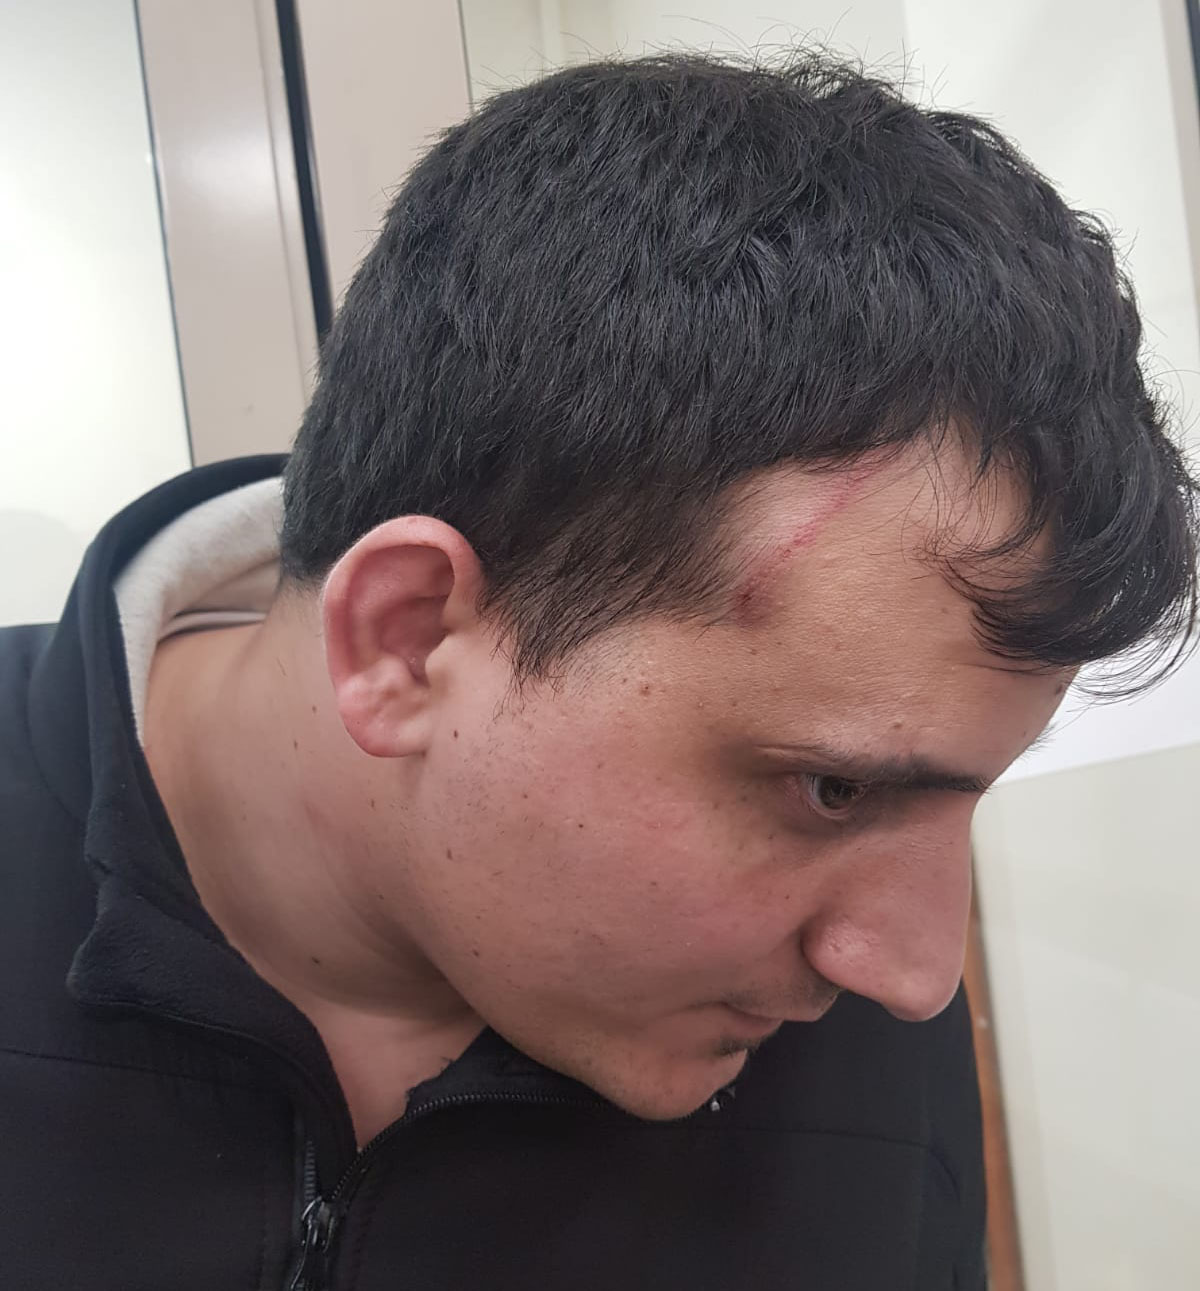 Union chairperson Tal Shitrit with a visible head wound after attempting to enter company headquarters in Petach Tikva (Photograph: Histadrut)